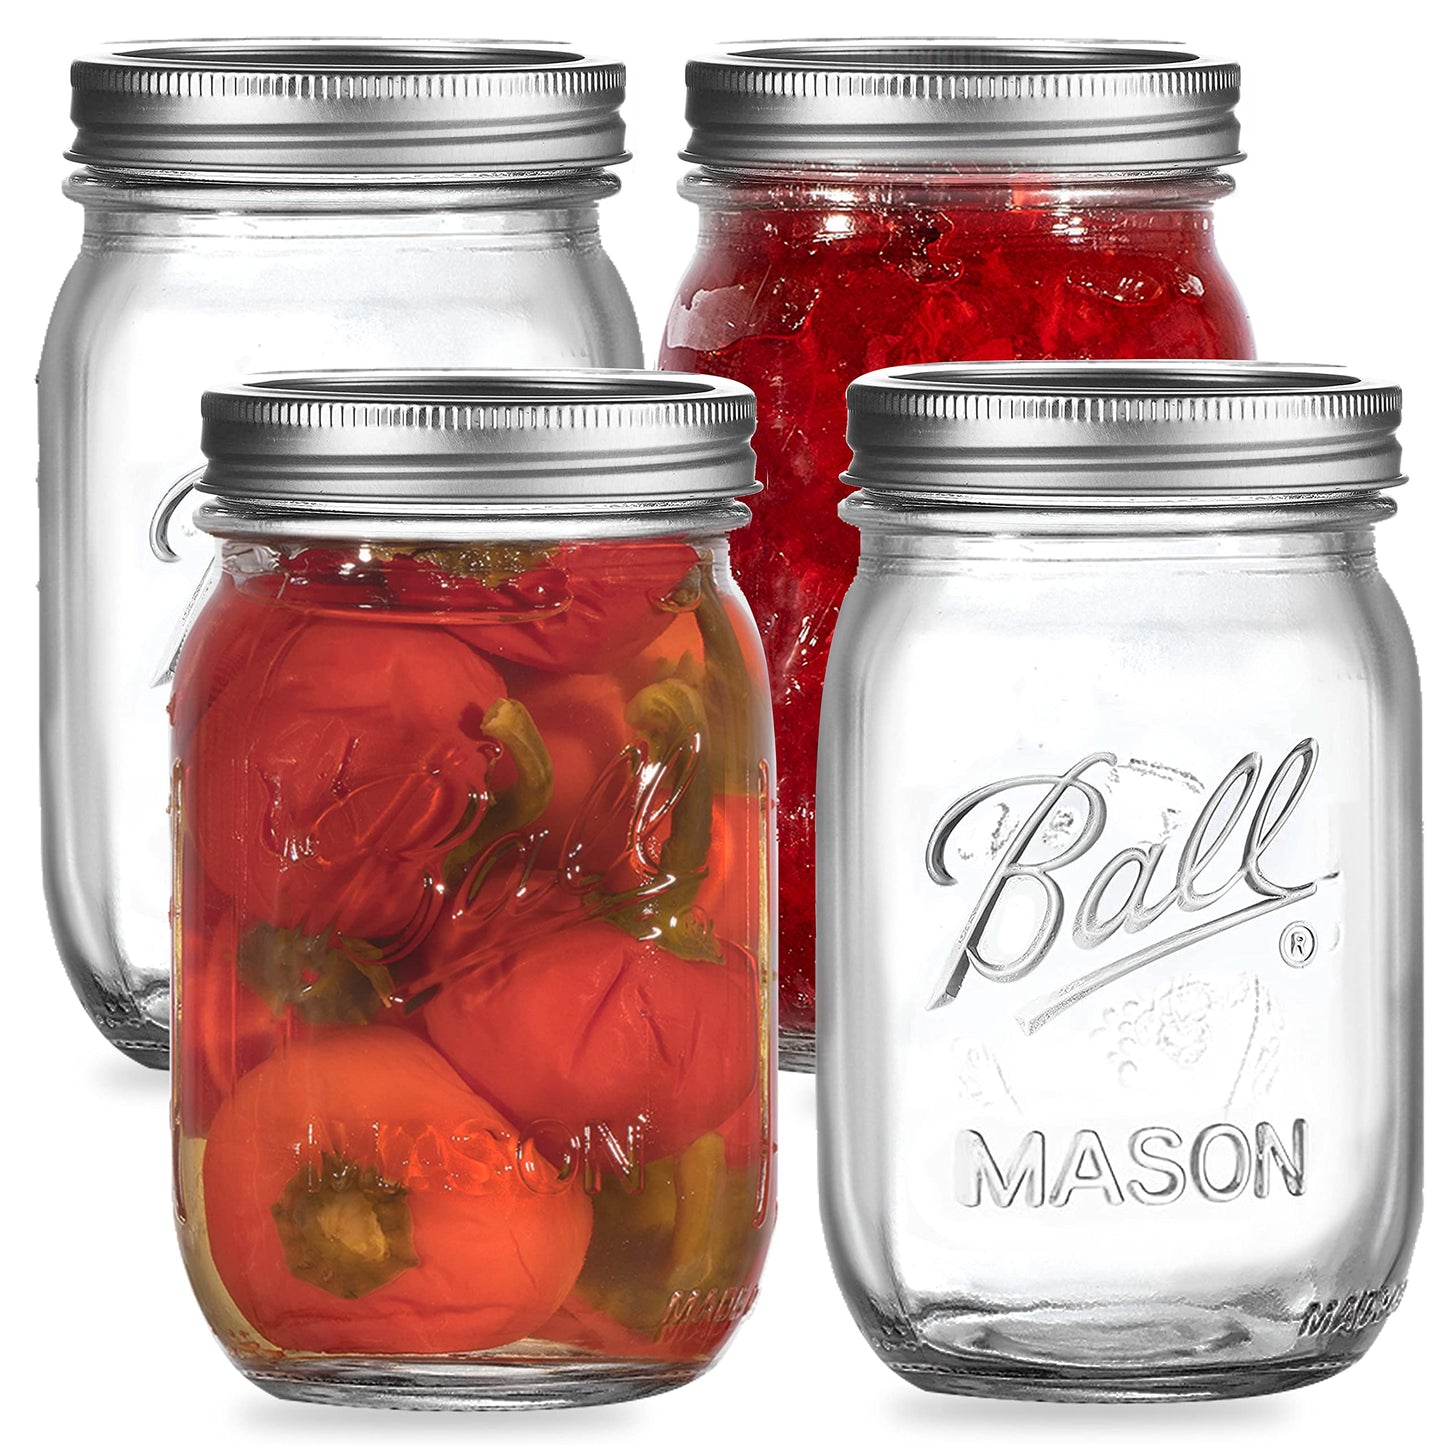 Regular Mouth Mason Jars 16 oz. (4 Pack) - Pint Size Jars with Airtight Lids and Bands for Canning, Fermenting, Pickling, Meal Prep, or DIY Decors and Projects Bundled with Jar Opener